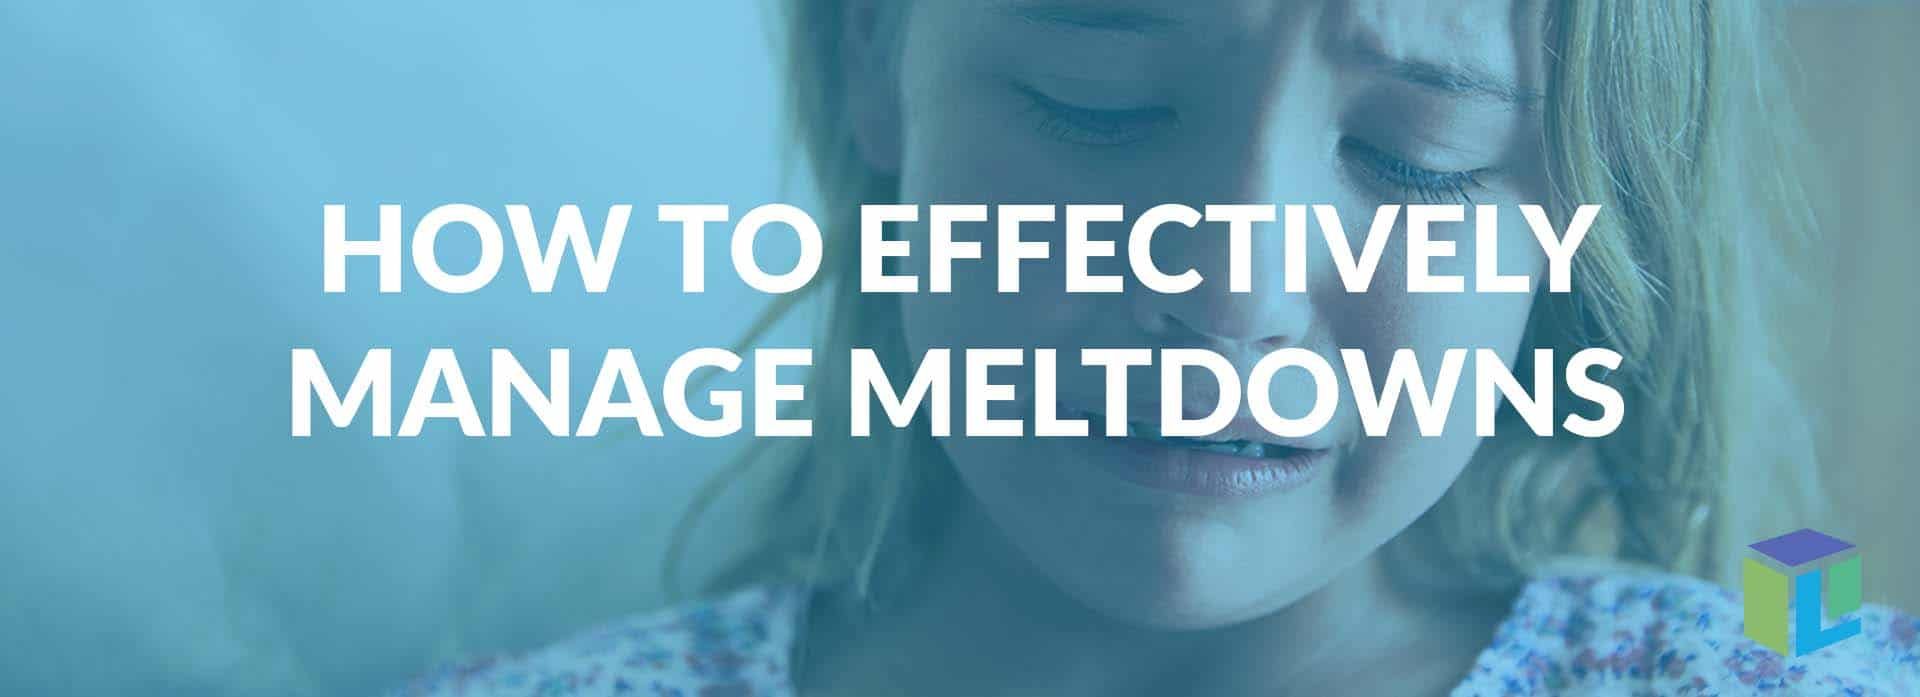 How To Effectively Manage Meltdowns How To Effectively Manage Meltdowns How To Effectively Manage Meltdowns How To Effectively Manage Meltdowns